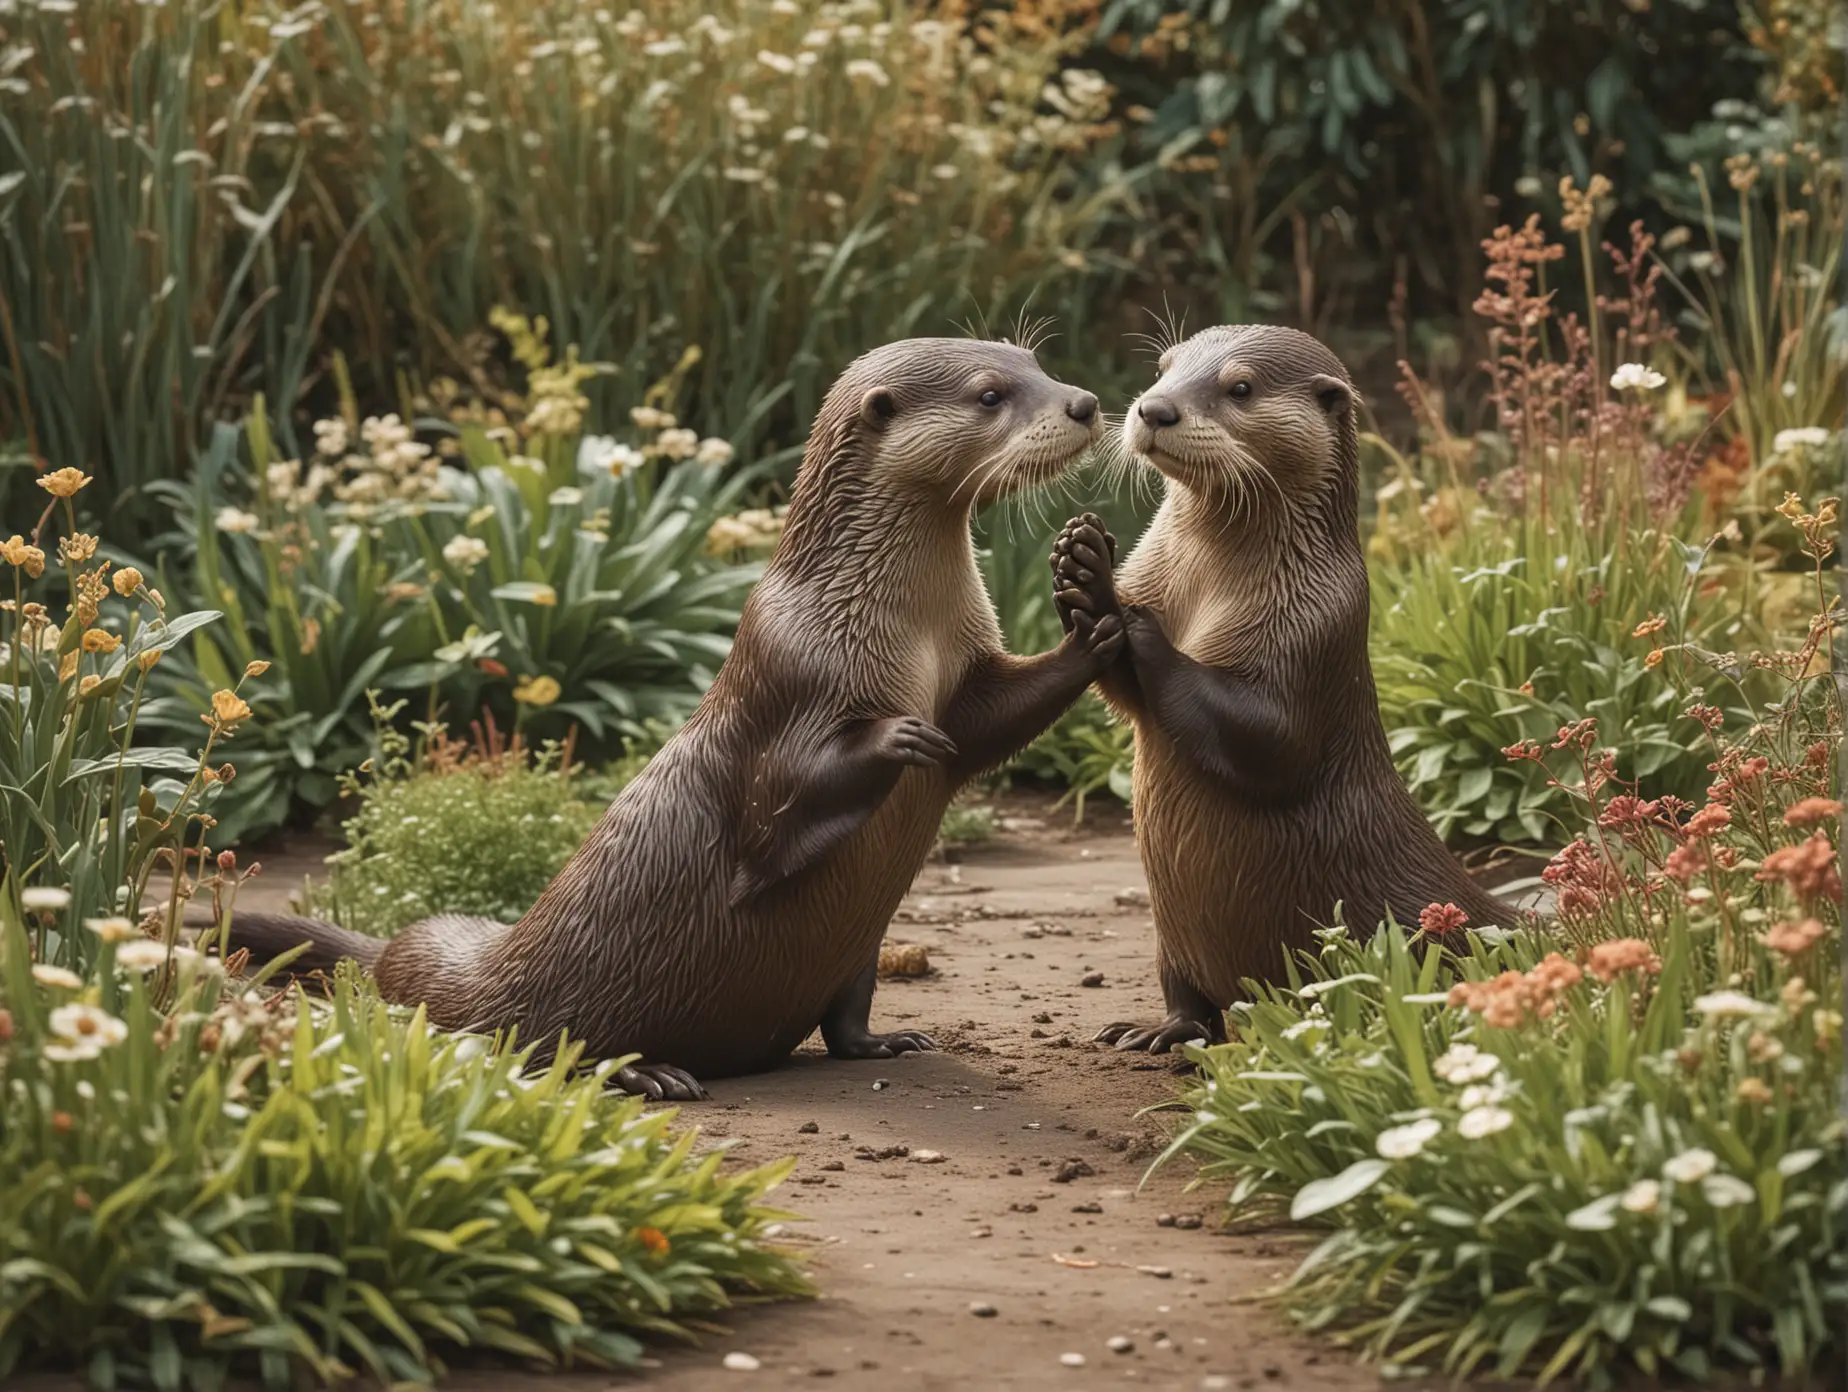 Cheerful Diverse Otters Enjoying Playtime in a Lush Garden Setting